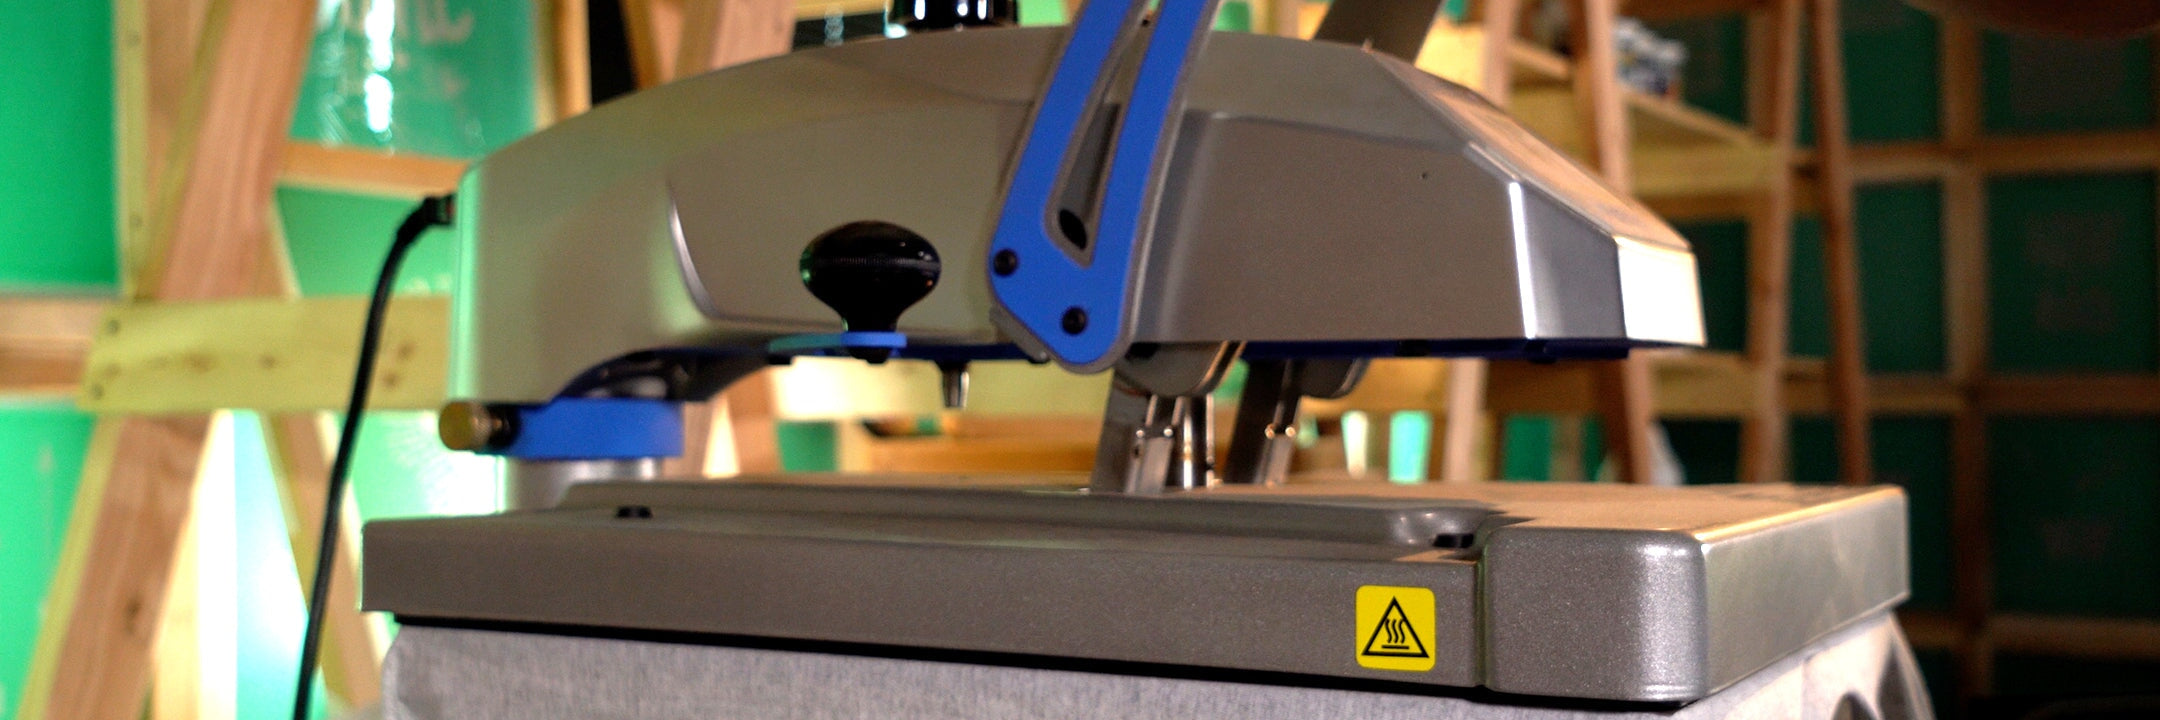 How Adding a Vinyl Cutter can Increase Your Shop's Offerings